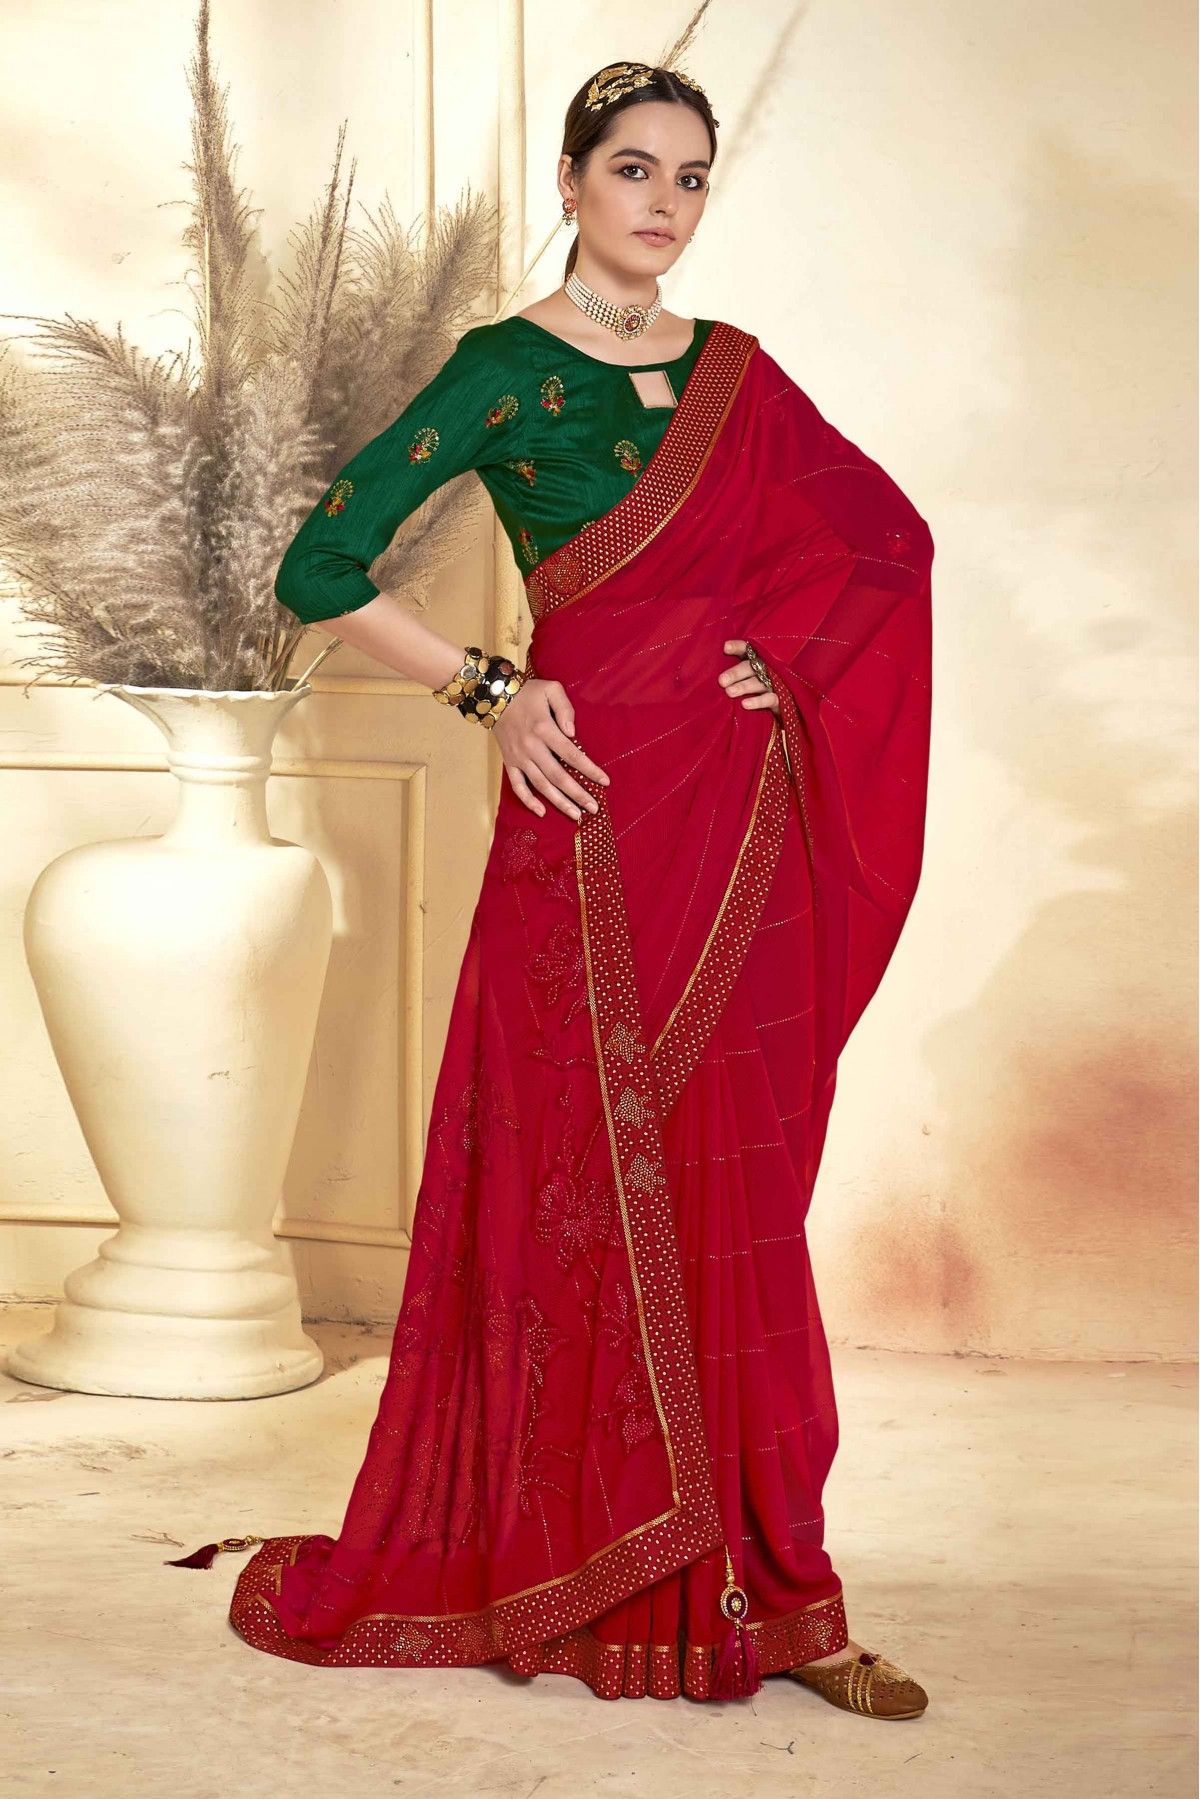 Give Your Red Kanjeevaram Saree a New Look with These Blouse Options